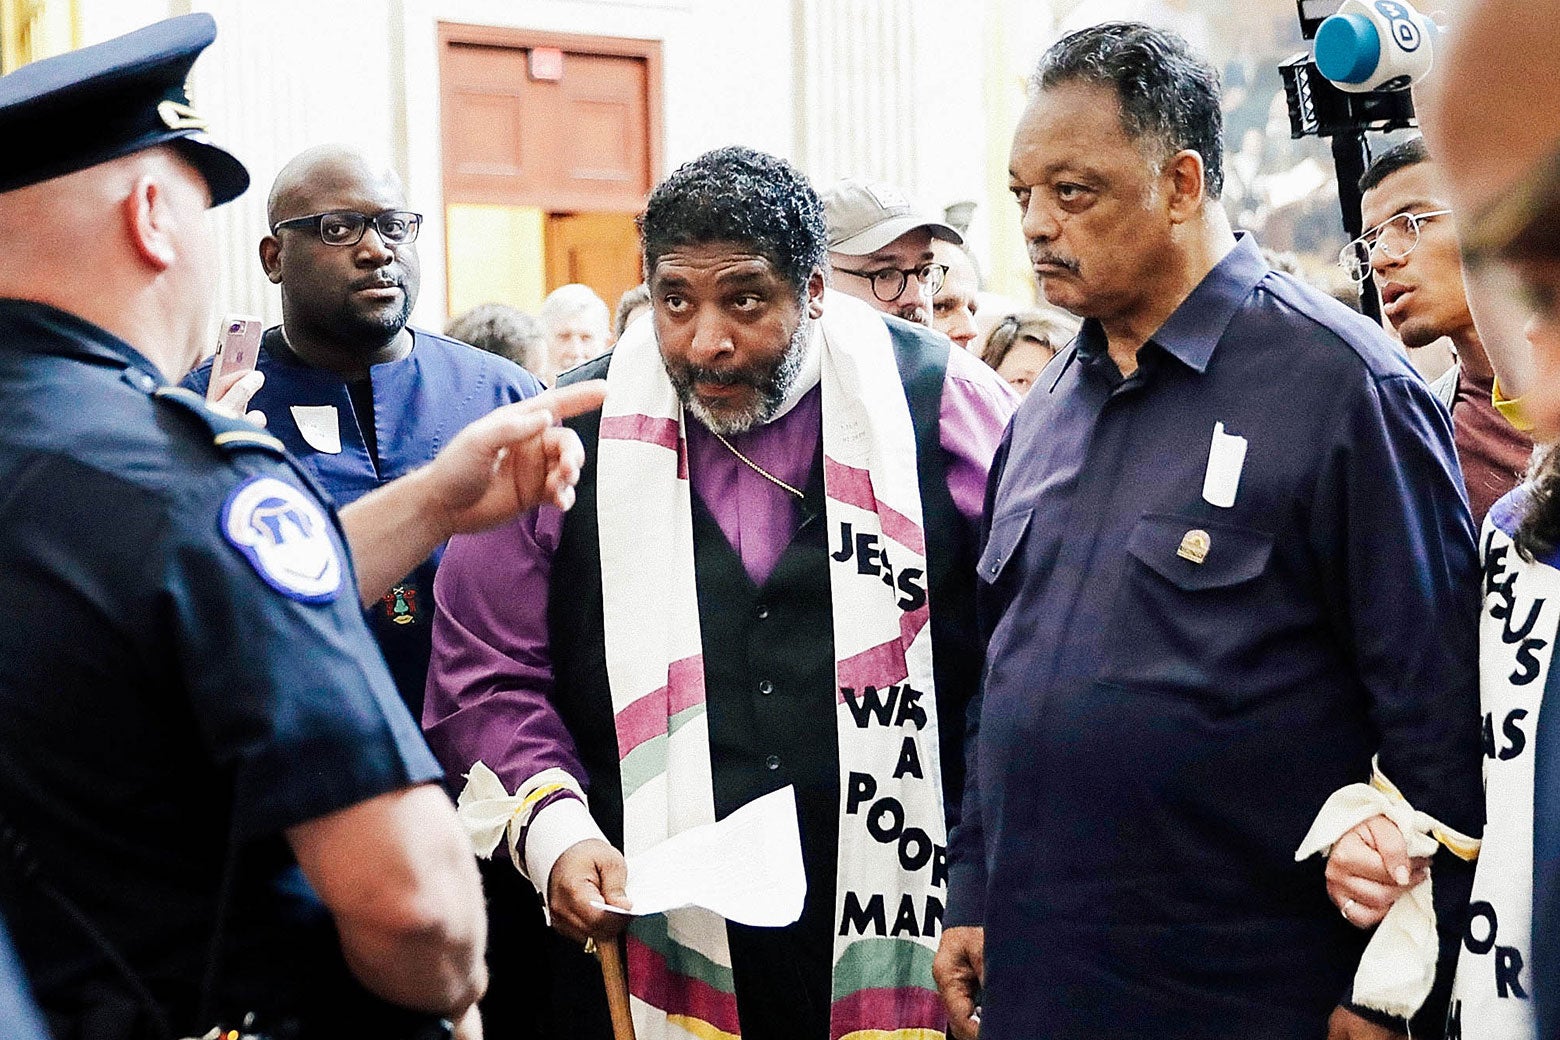 Police stop the Rev. William Barber, the Rev. Jesse Jackson, and other clergy and demonstrators attempting to deliver a letter to the Senate on May 21 at the U.S. Capitol in Washington. Barber is wearing a scarf with the words "Jesus Was a Poor Man" visible.